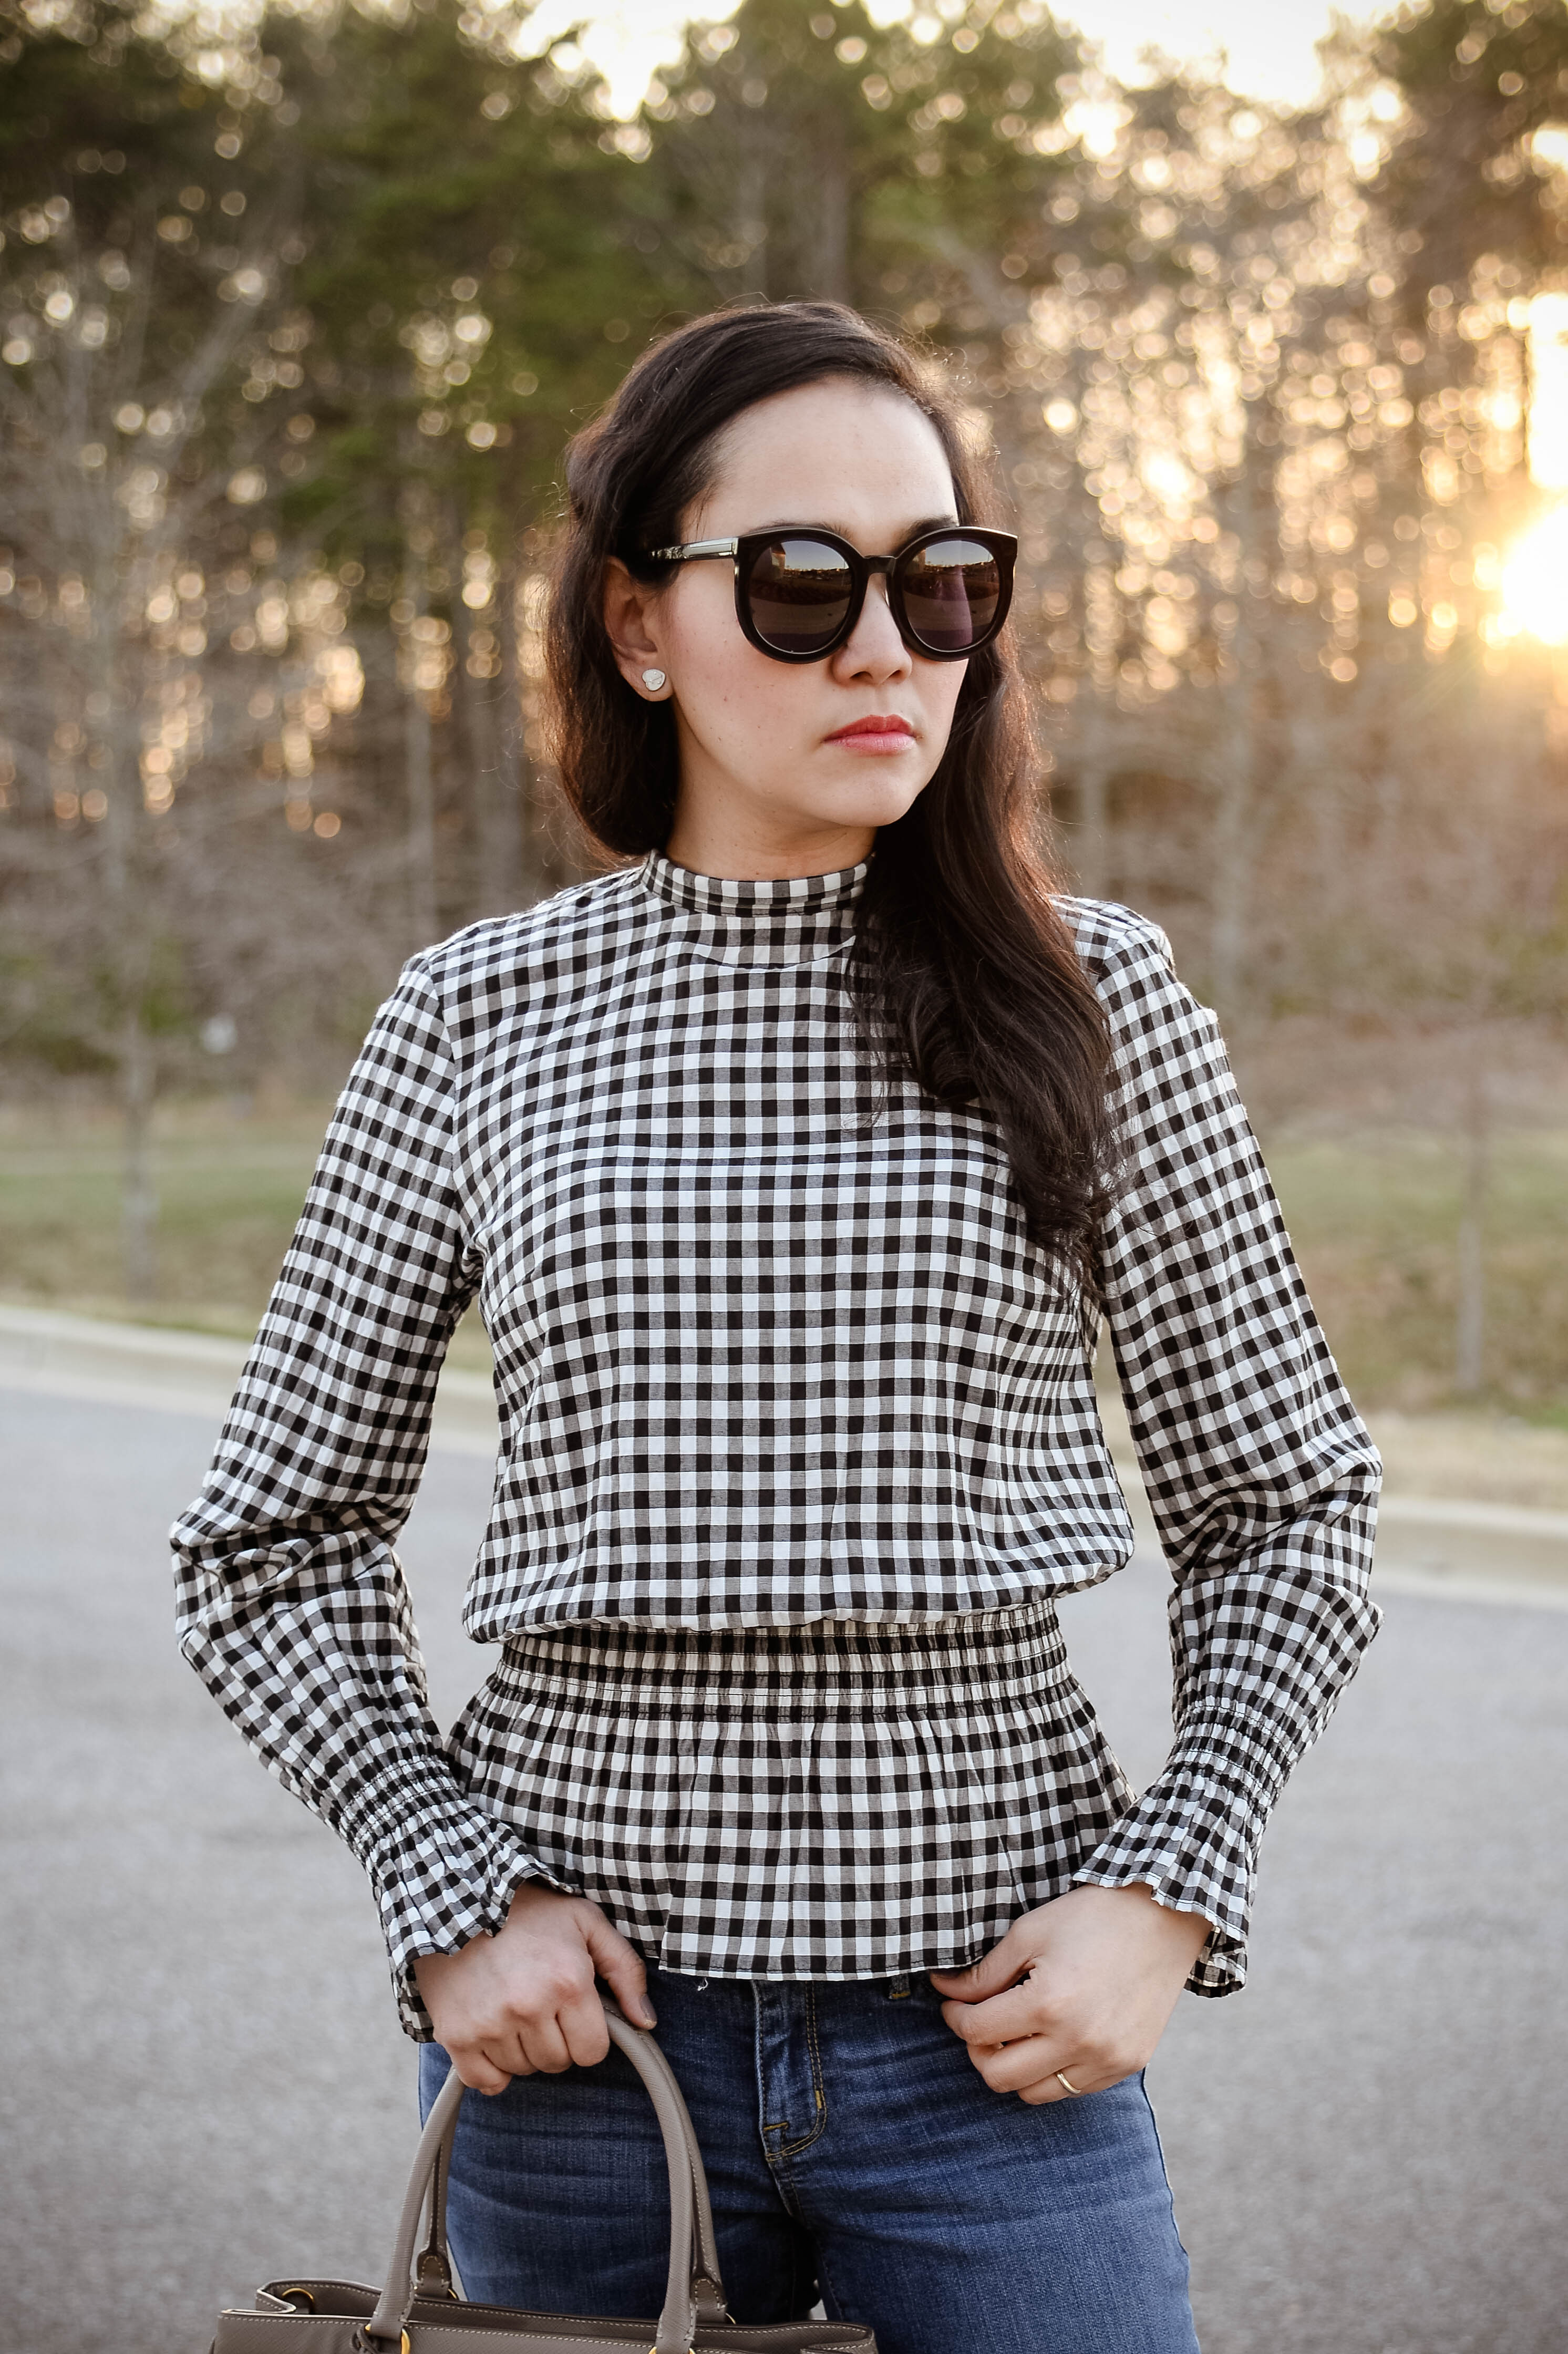 Gingham Style All the Way